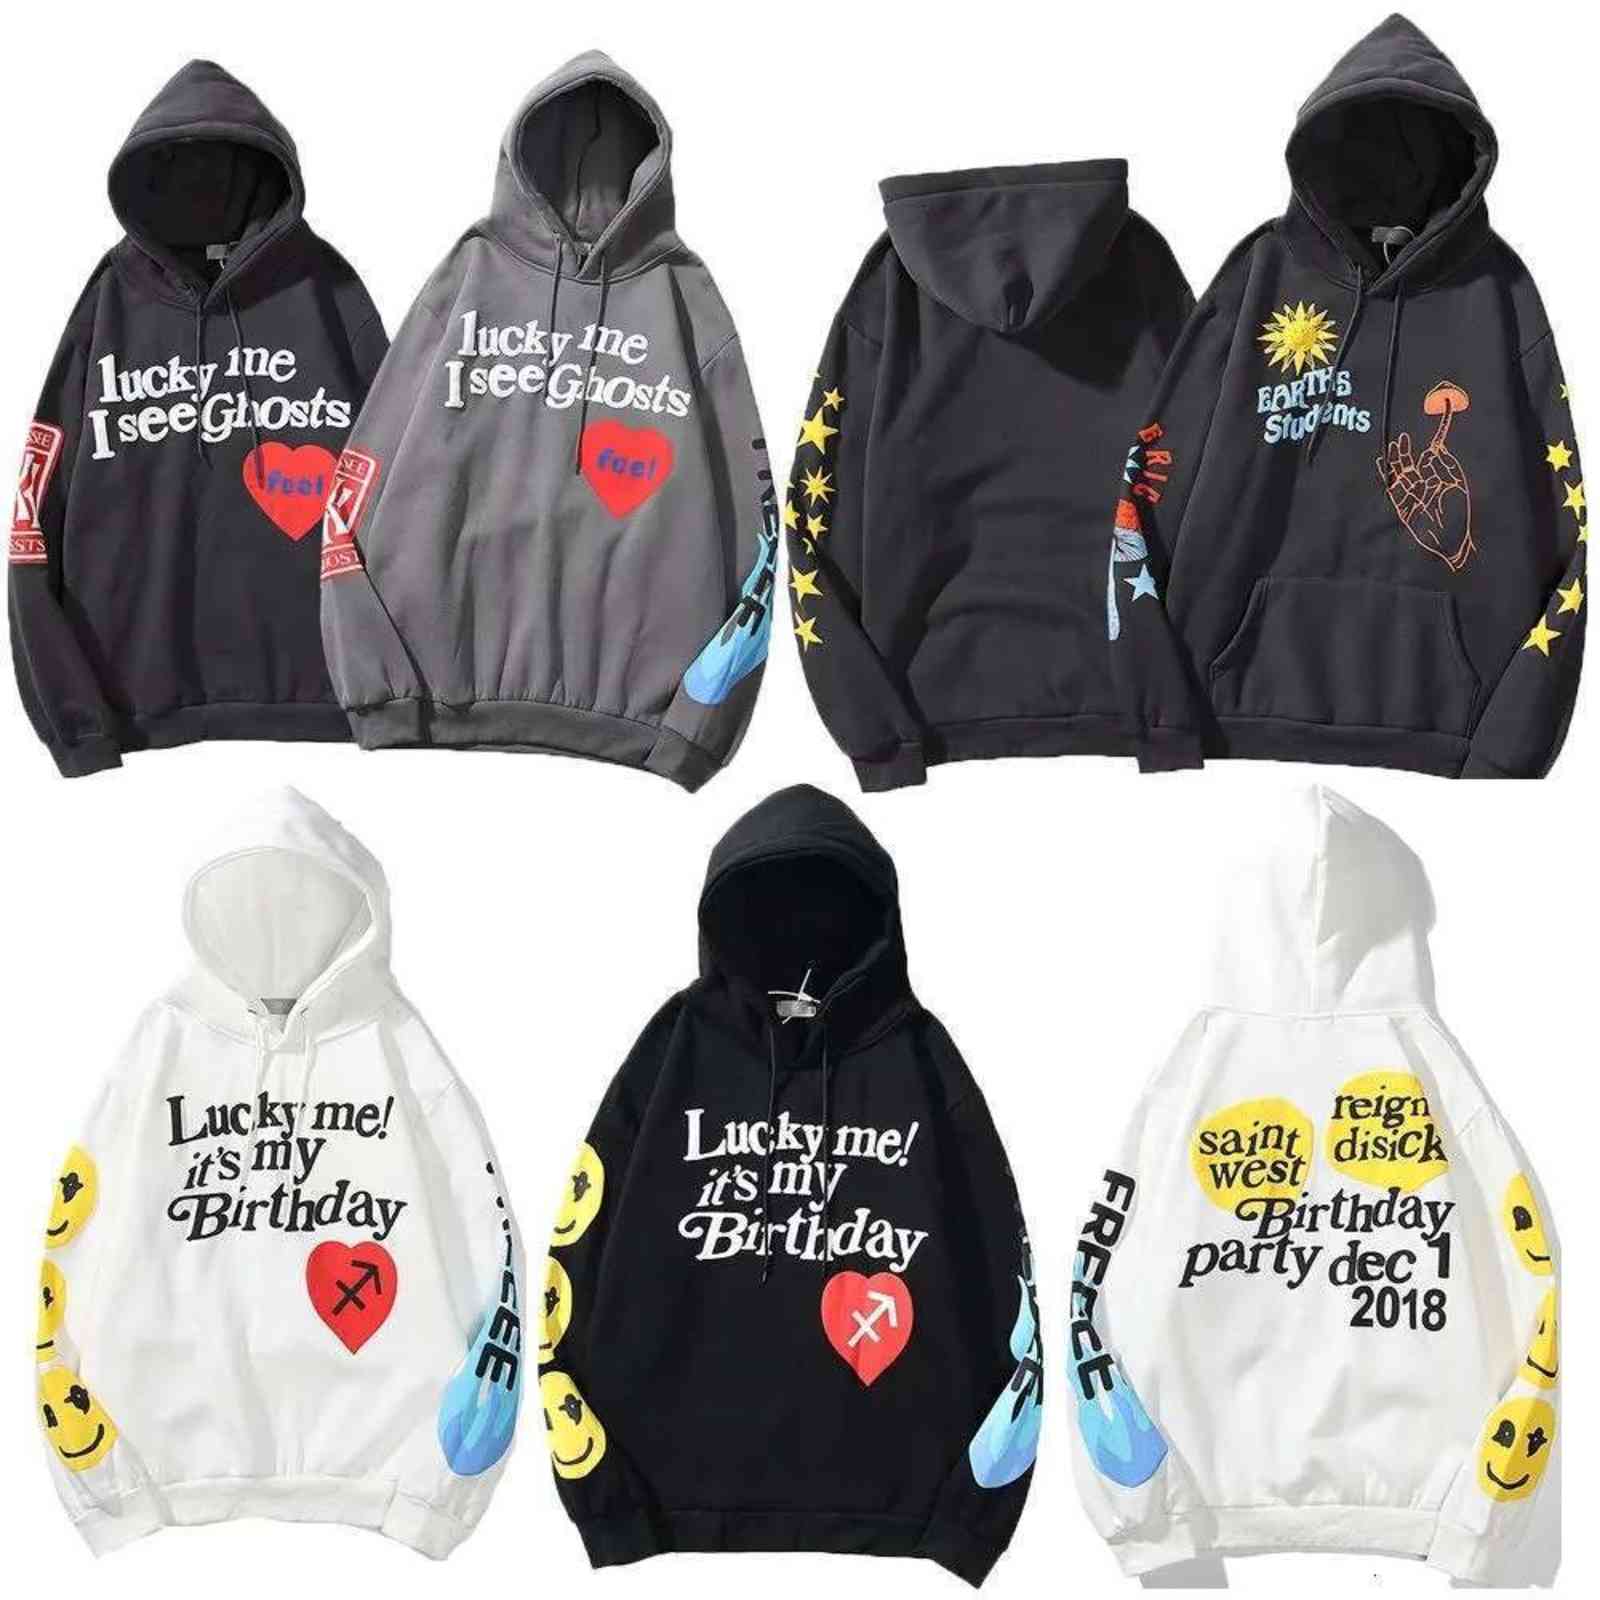 

Hoodie 3D Foam Printing Sweatshirts Kanye West cpfm touch my soul ye must be born again Pullover Men Women High Quality Kids See Ghosts vip 6IL7 603, Contact customer service